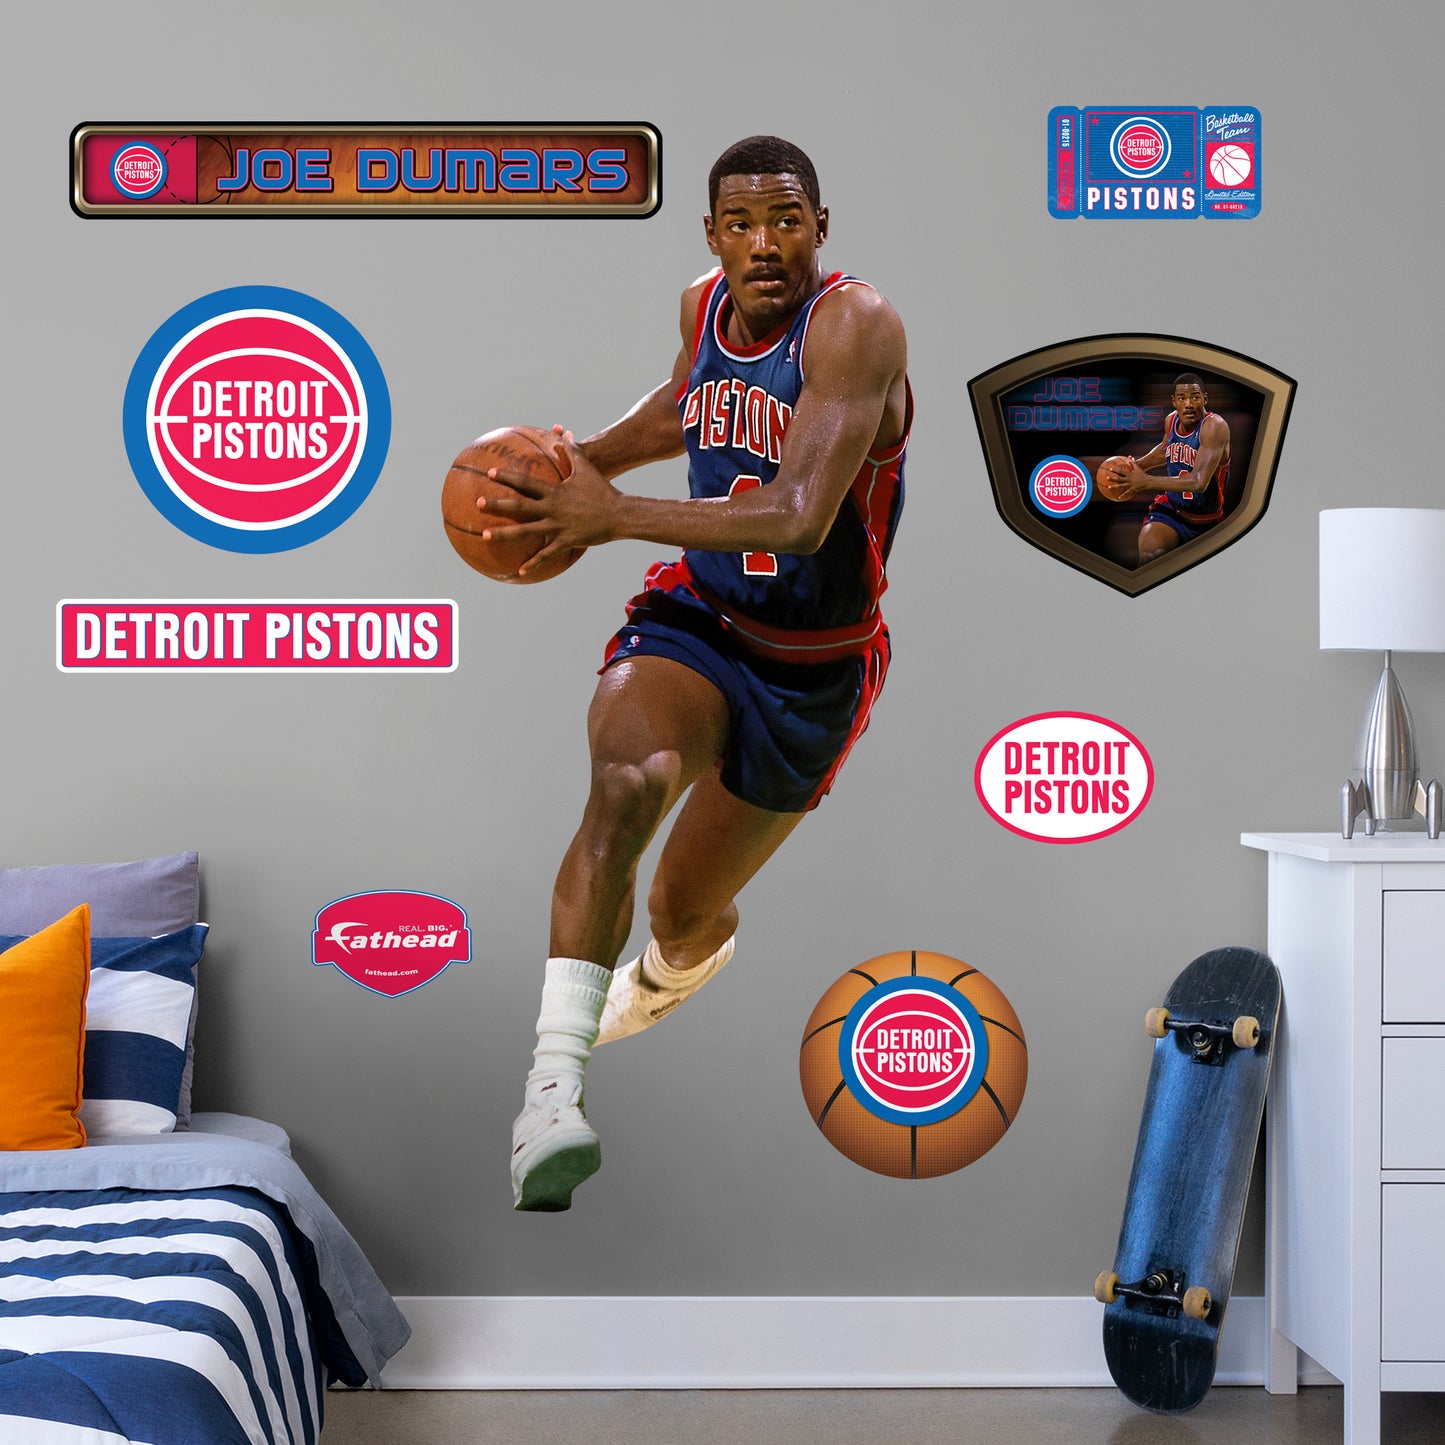 Joe Dumars Legend  - Officially Licensed NBA Removable Wall Decal